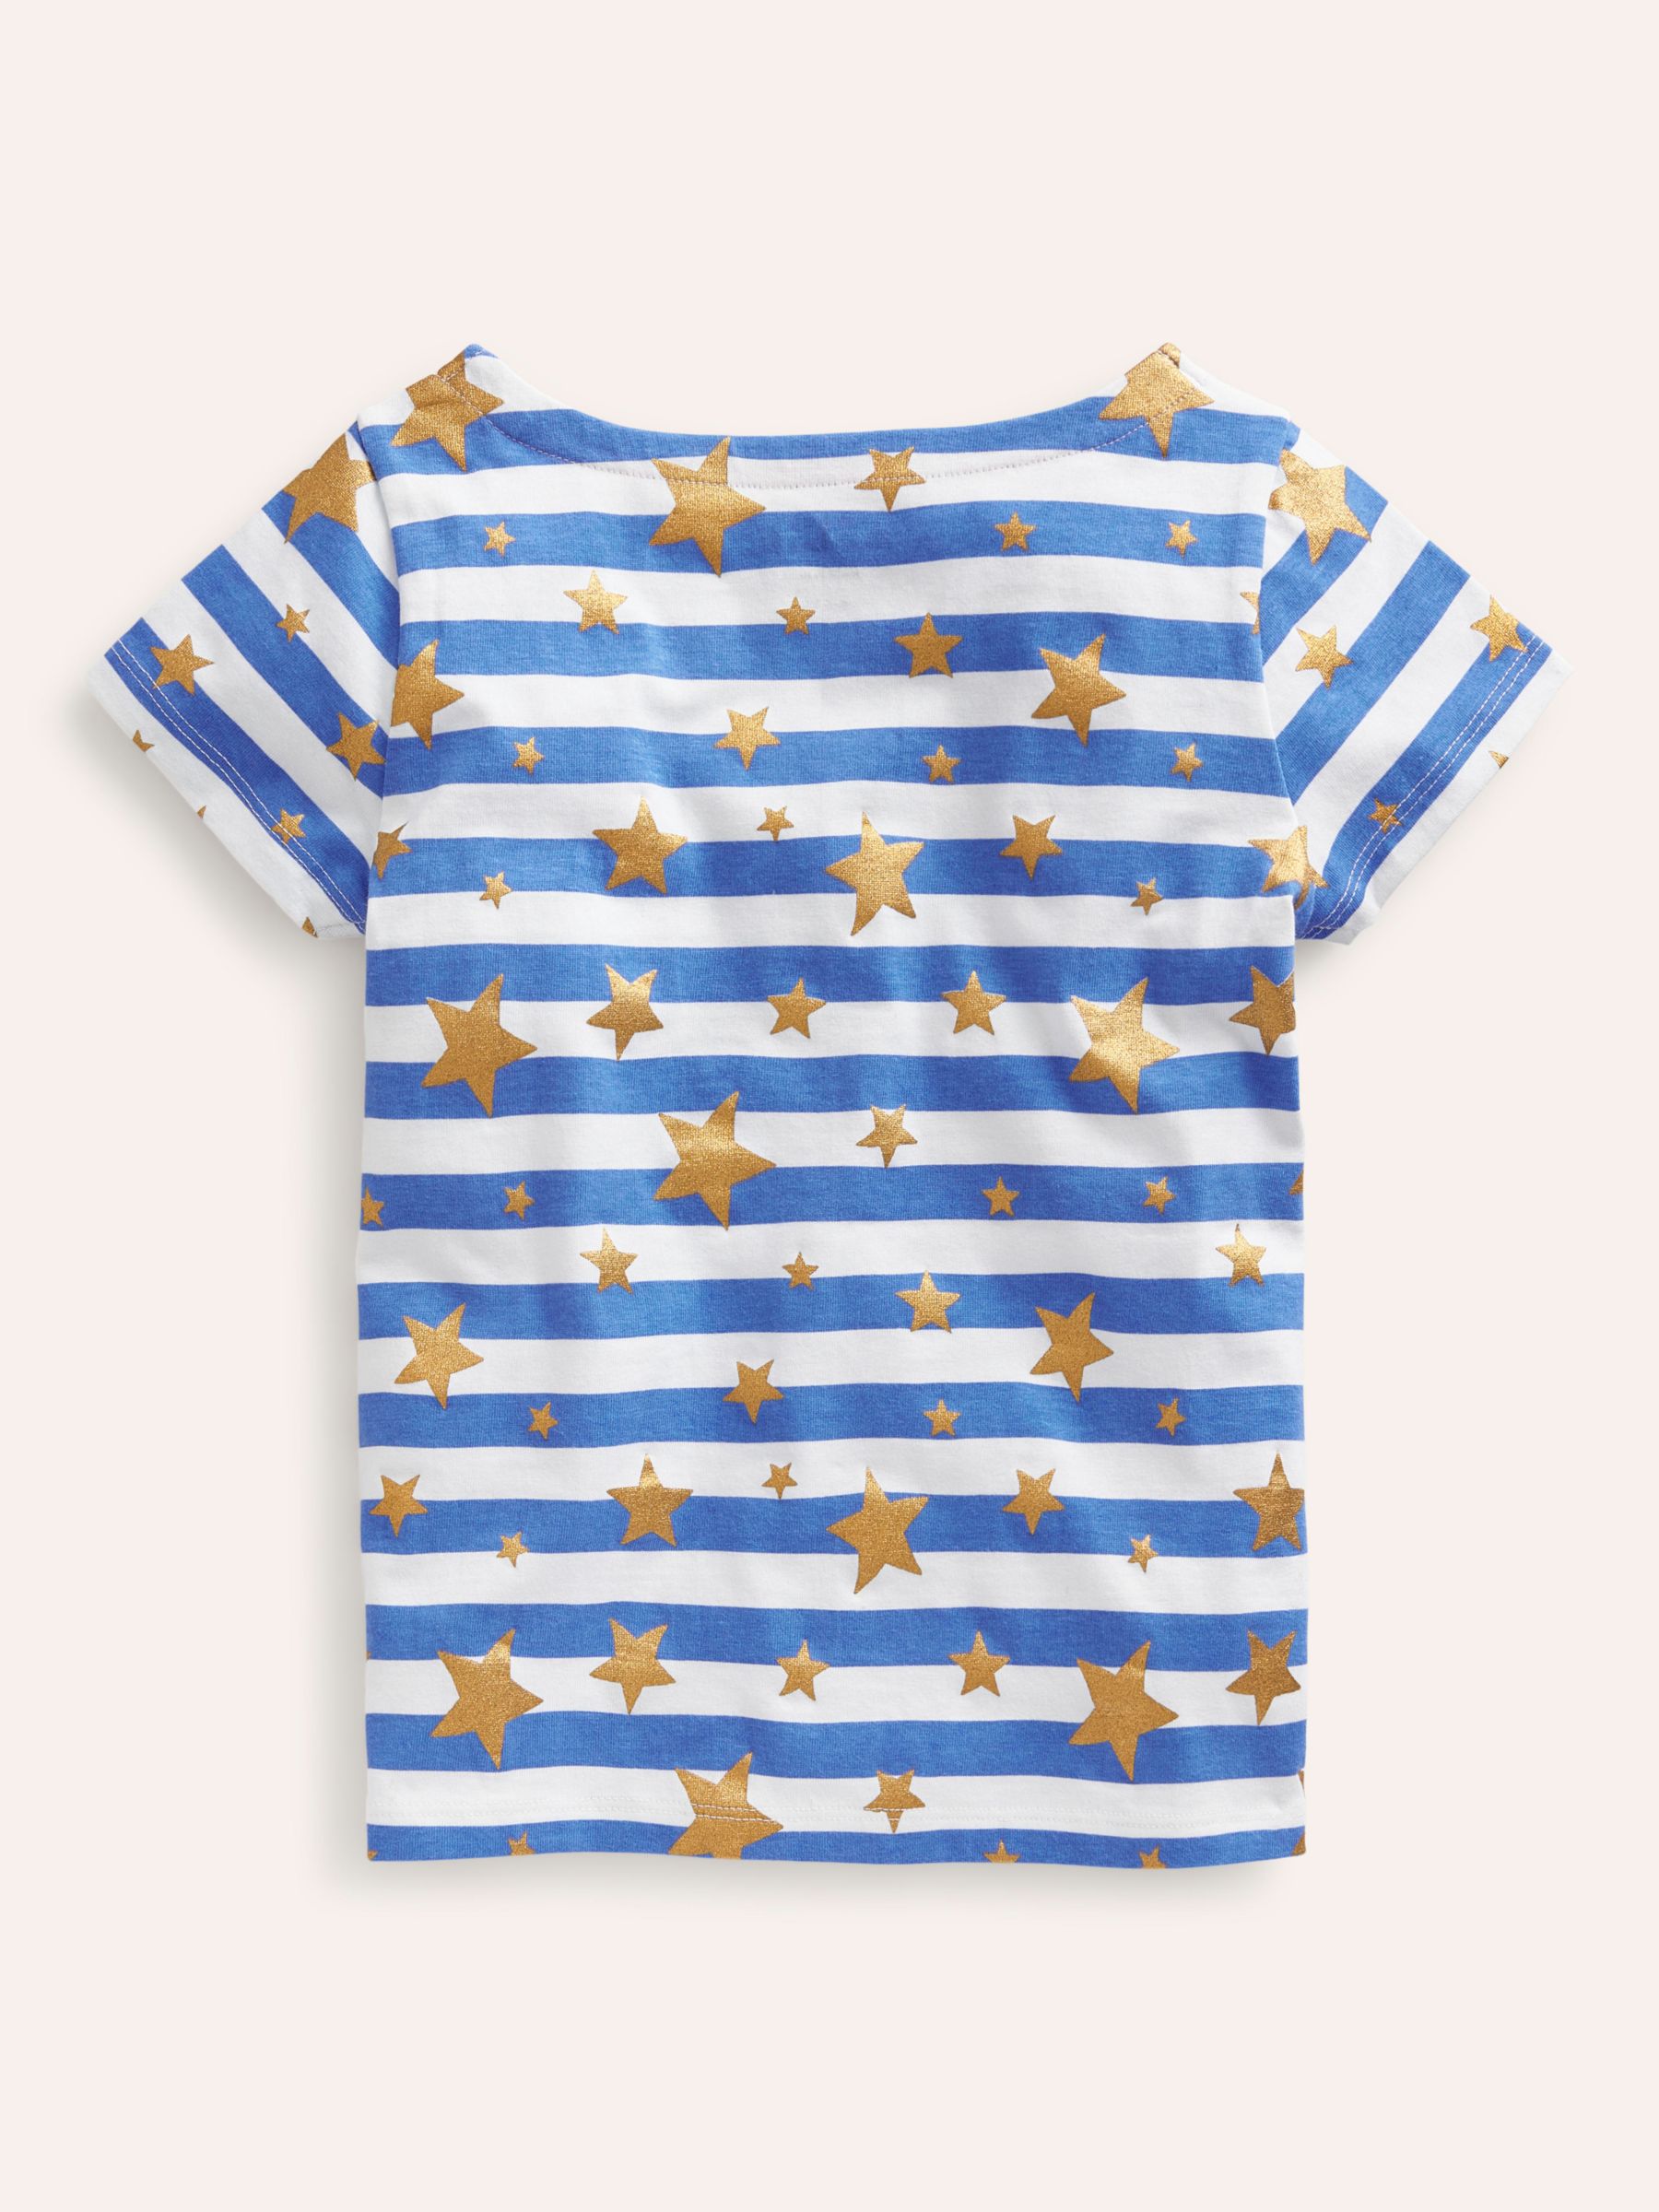 Buy Mini Boden Kids' Stripe and Star Short Sleeve Cotton T-Shirt, Ivory/Plume Online at johnlewis.com